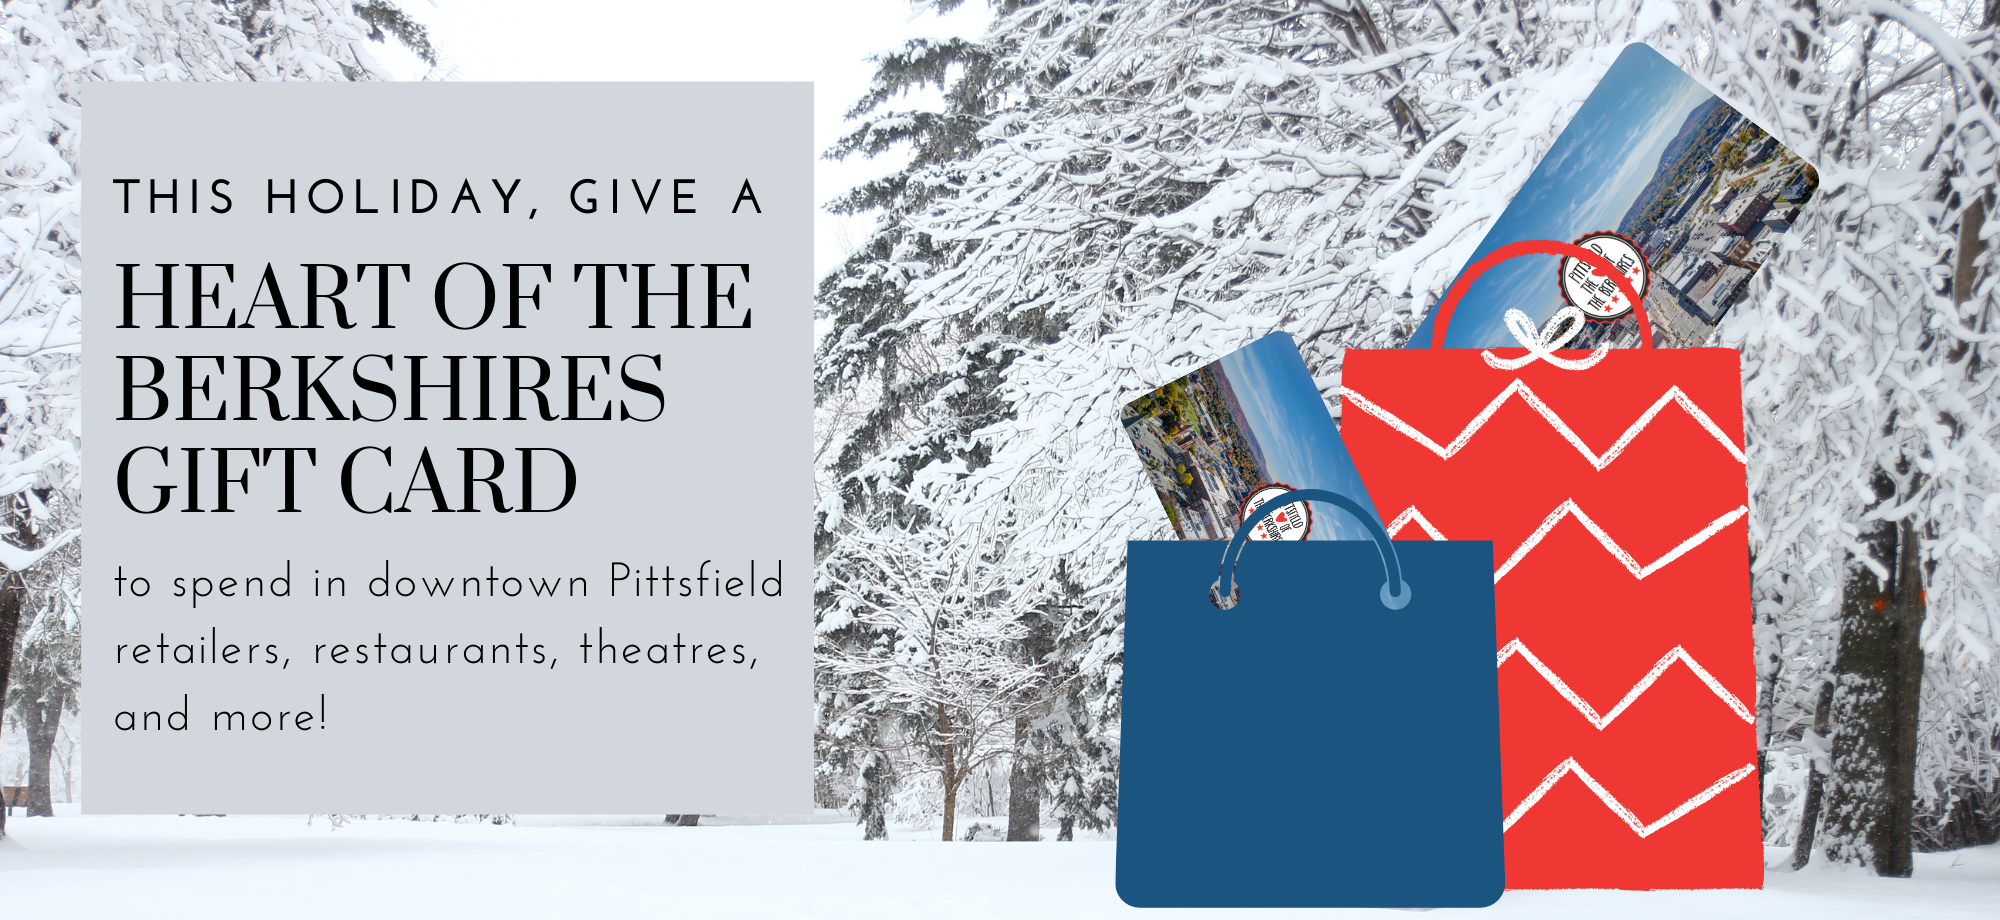 Heart Of The Berkshires Gift Card